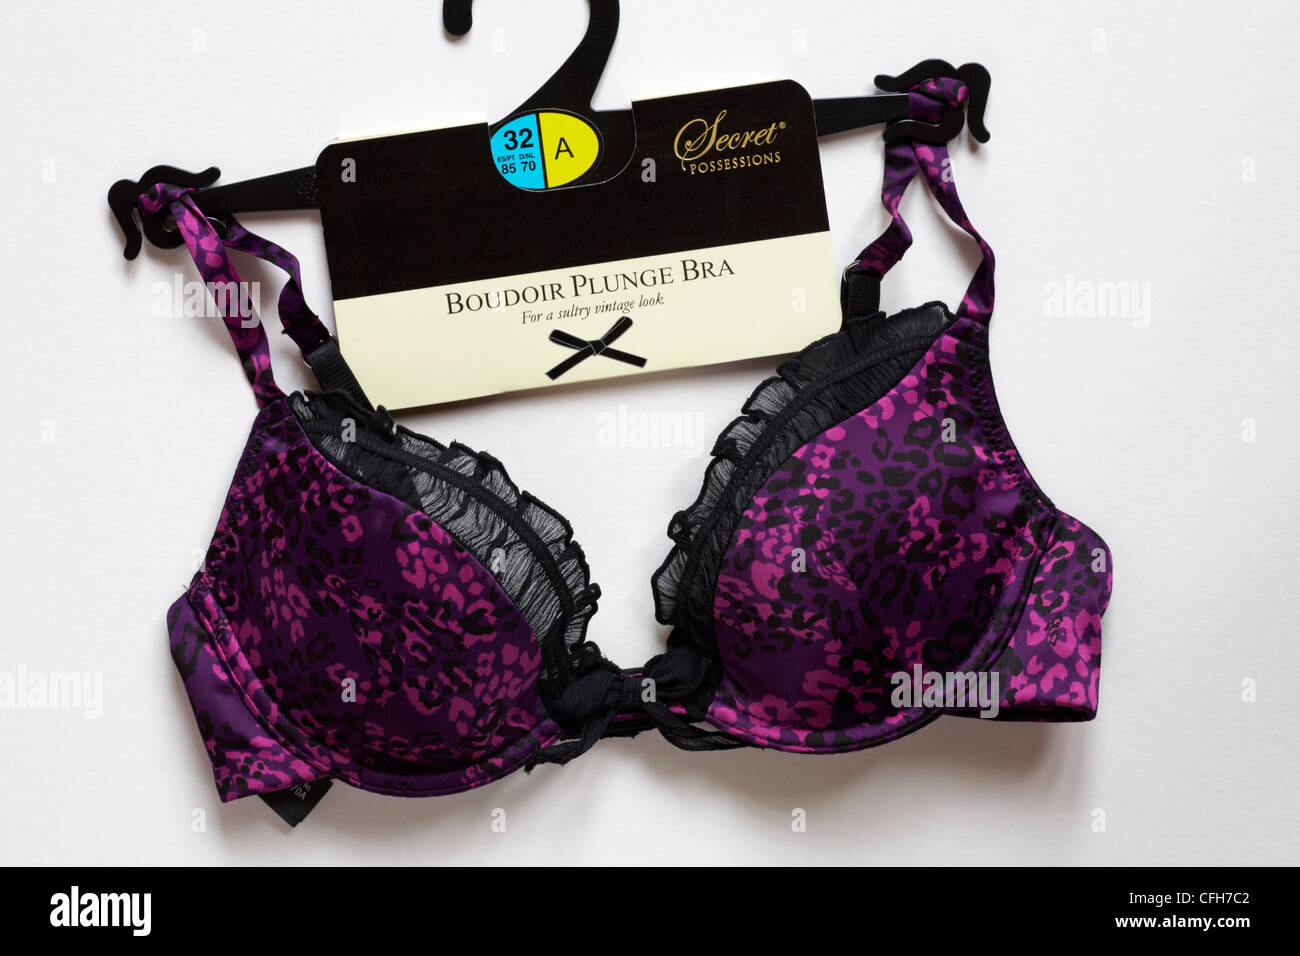 purple and black Secret Possessions Boudoir Plunge Bra for a sultry vintage  look on hanger isolated on white background Stock Photo - Alamy